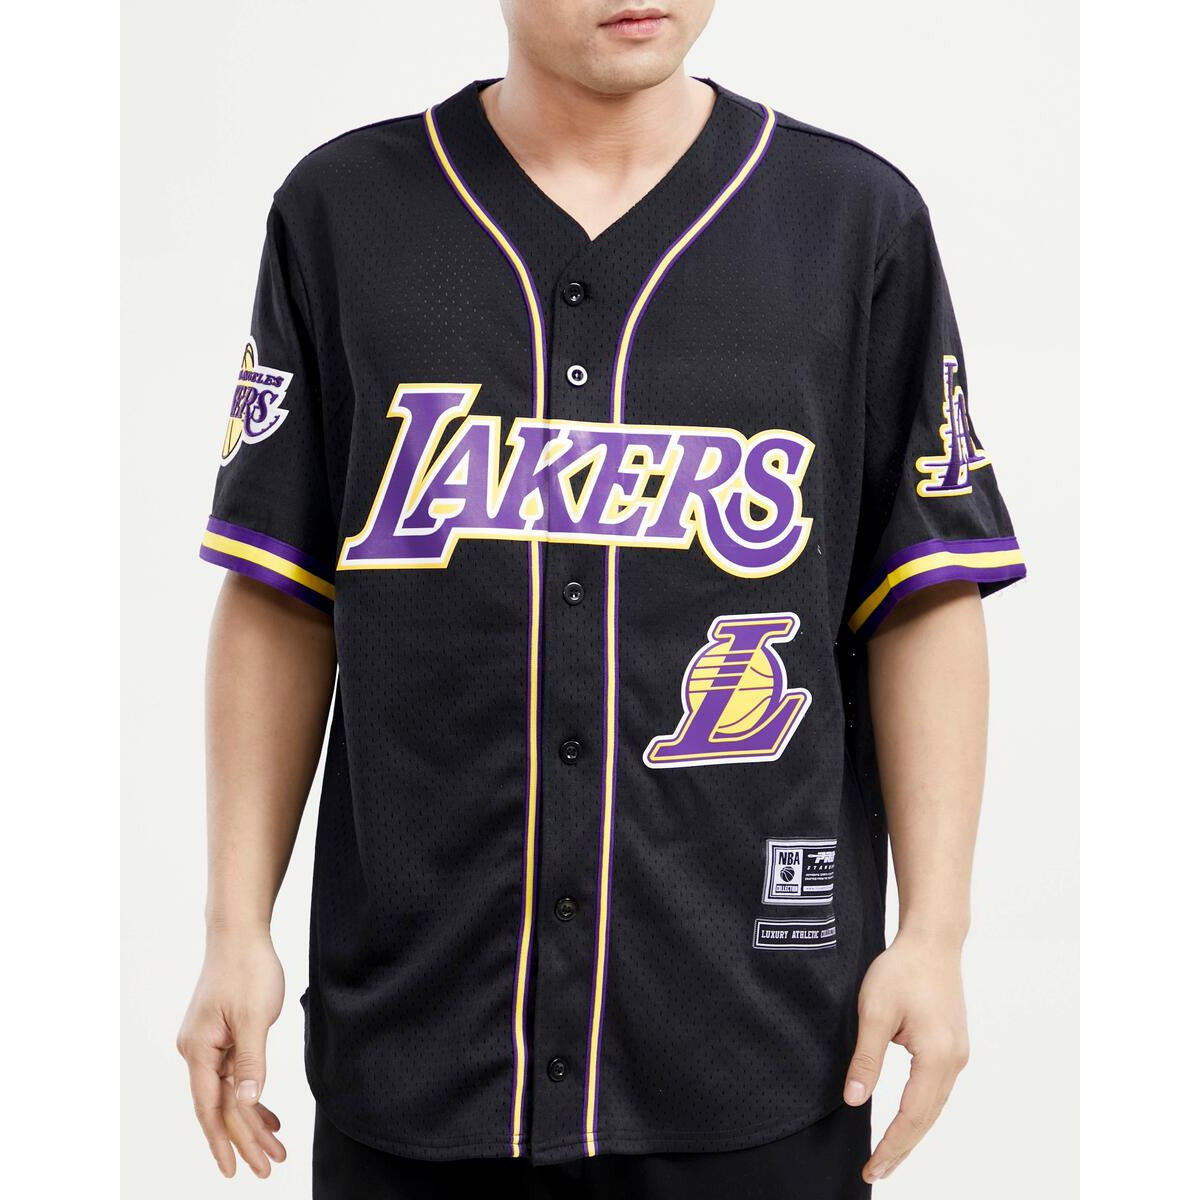 Los Angeles Lakers Baseball Jersey for Sale in San Jose, CA